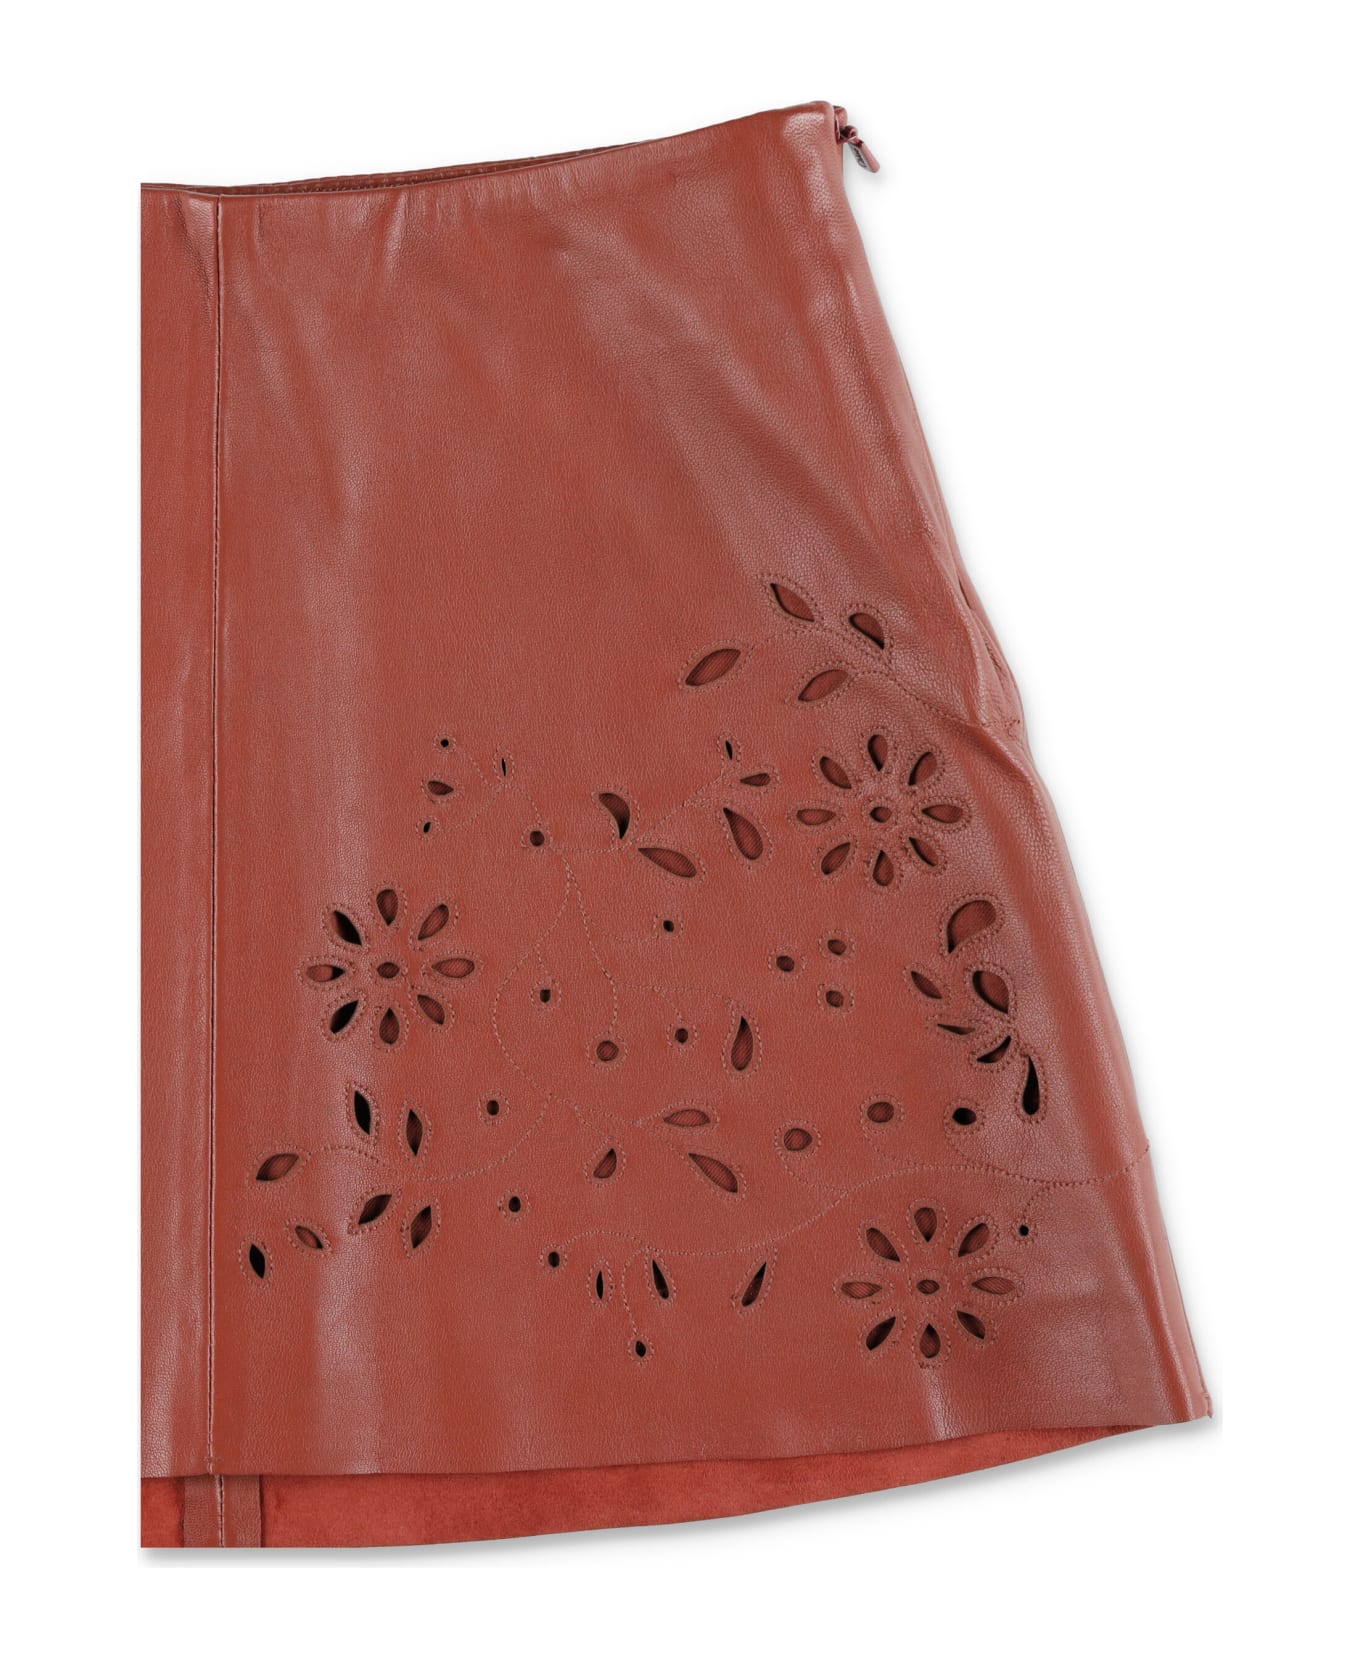 Chloé Leather Skirt - BROWN ボトムス